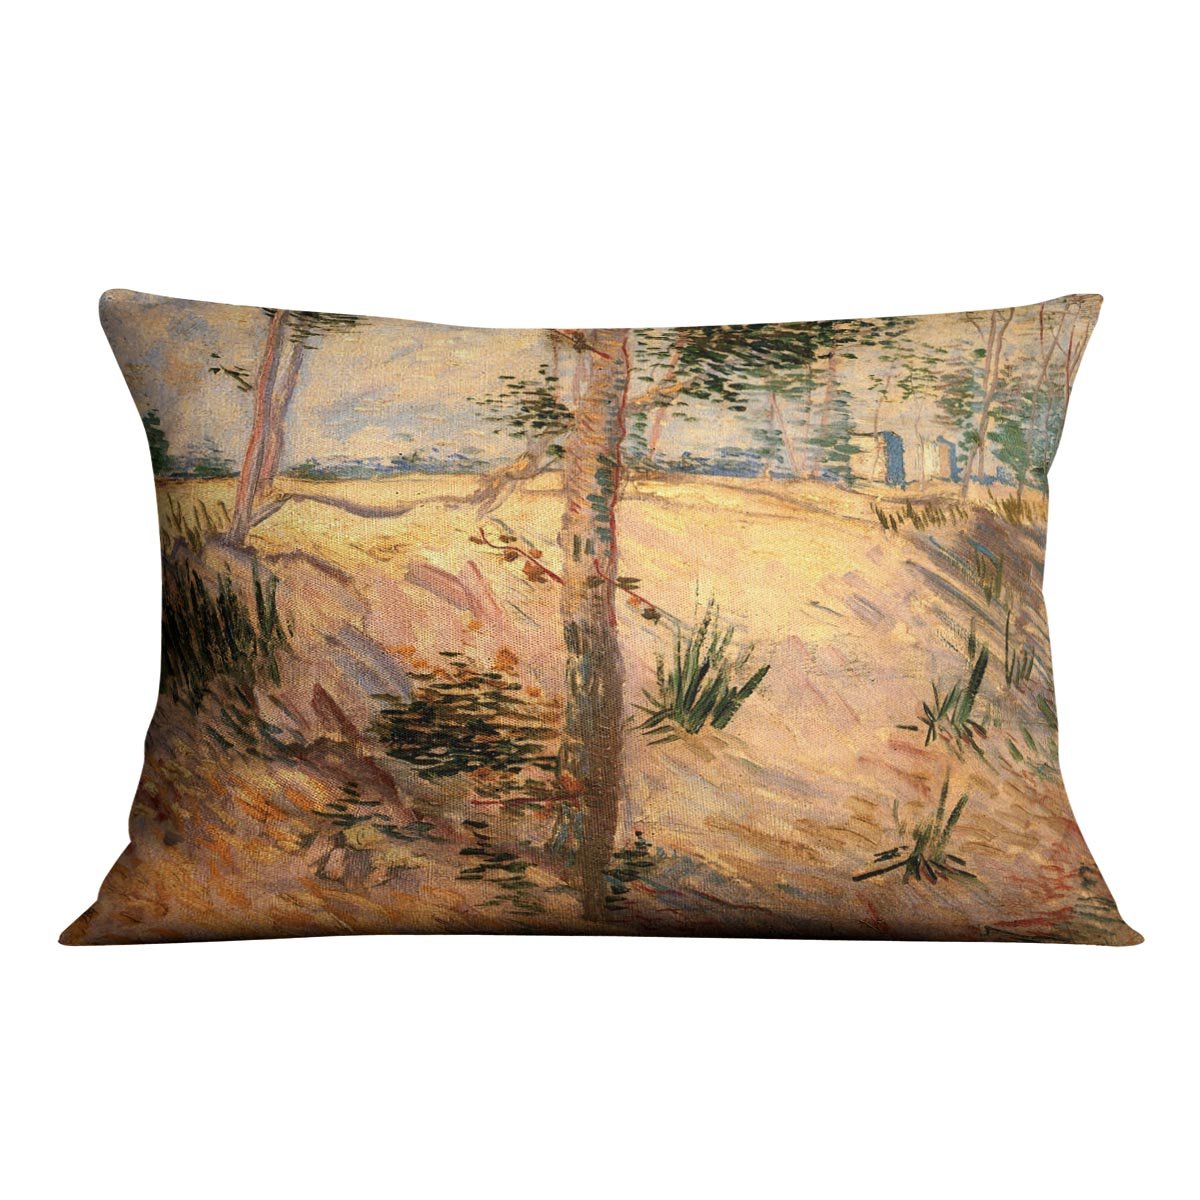 Trees in a Field on a Sunny Day by Van Gogh Throw Pillow